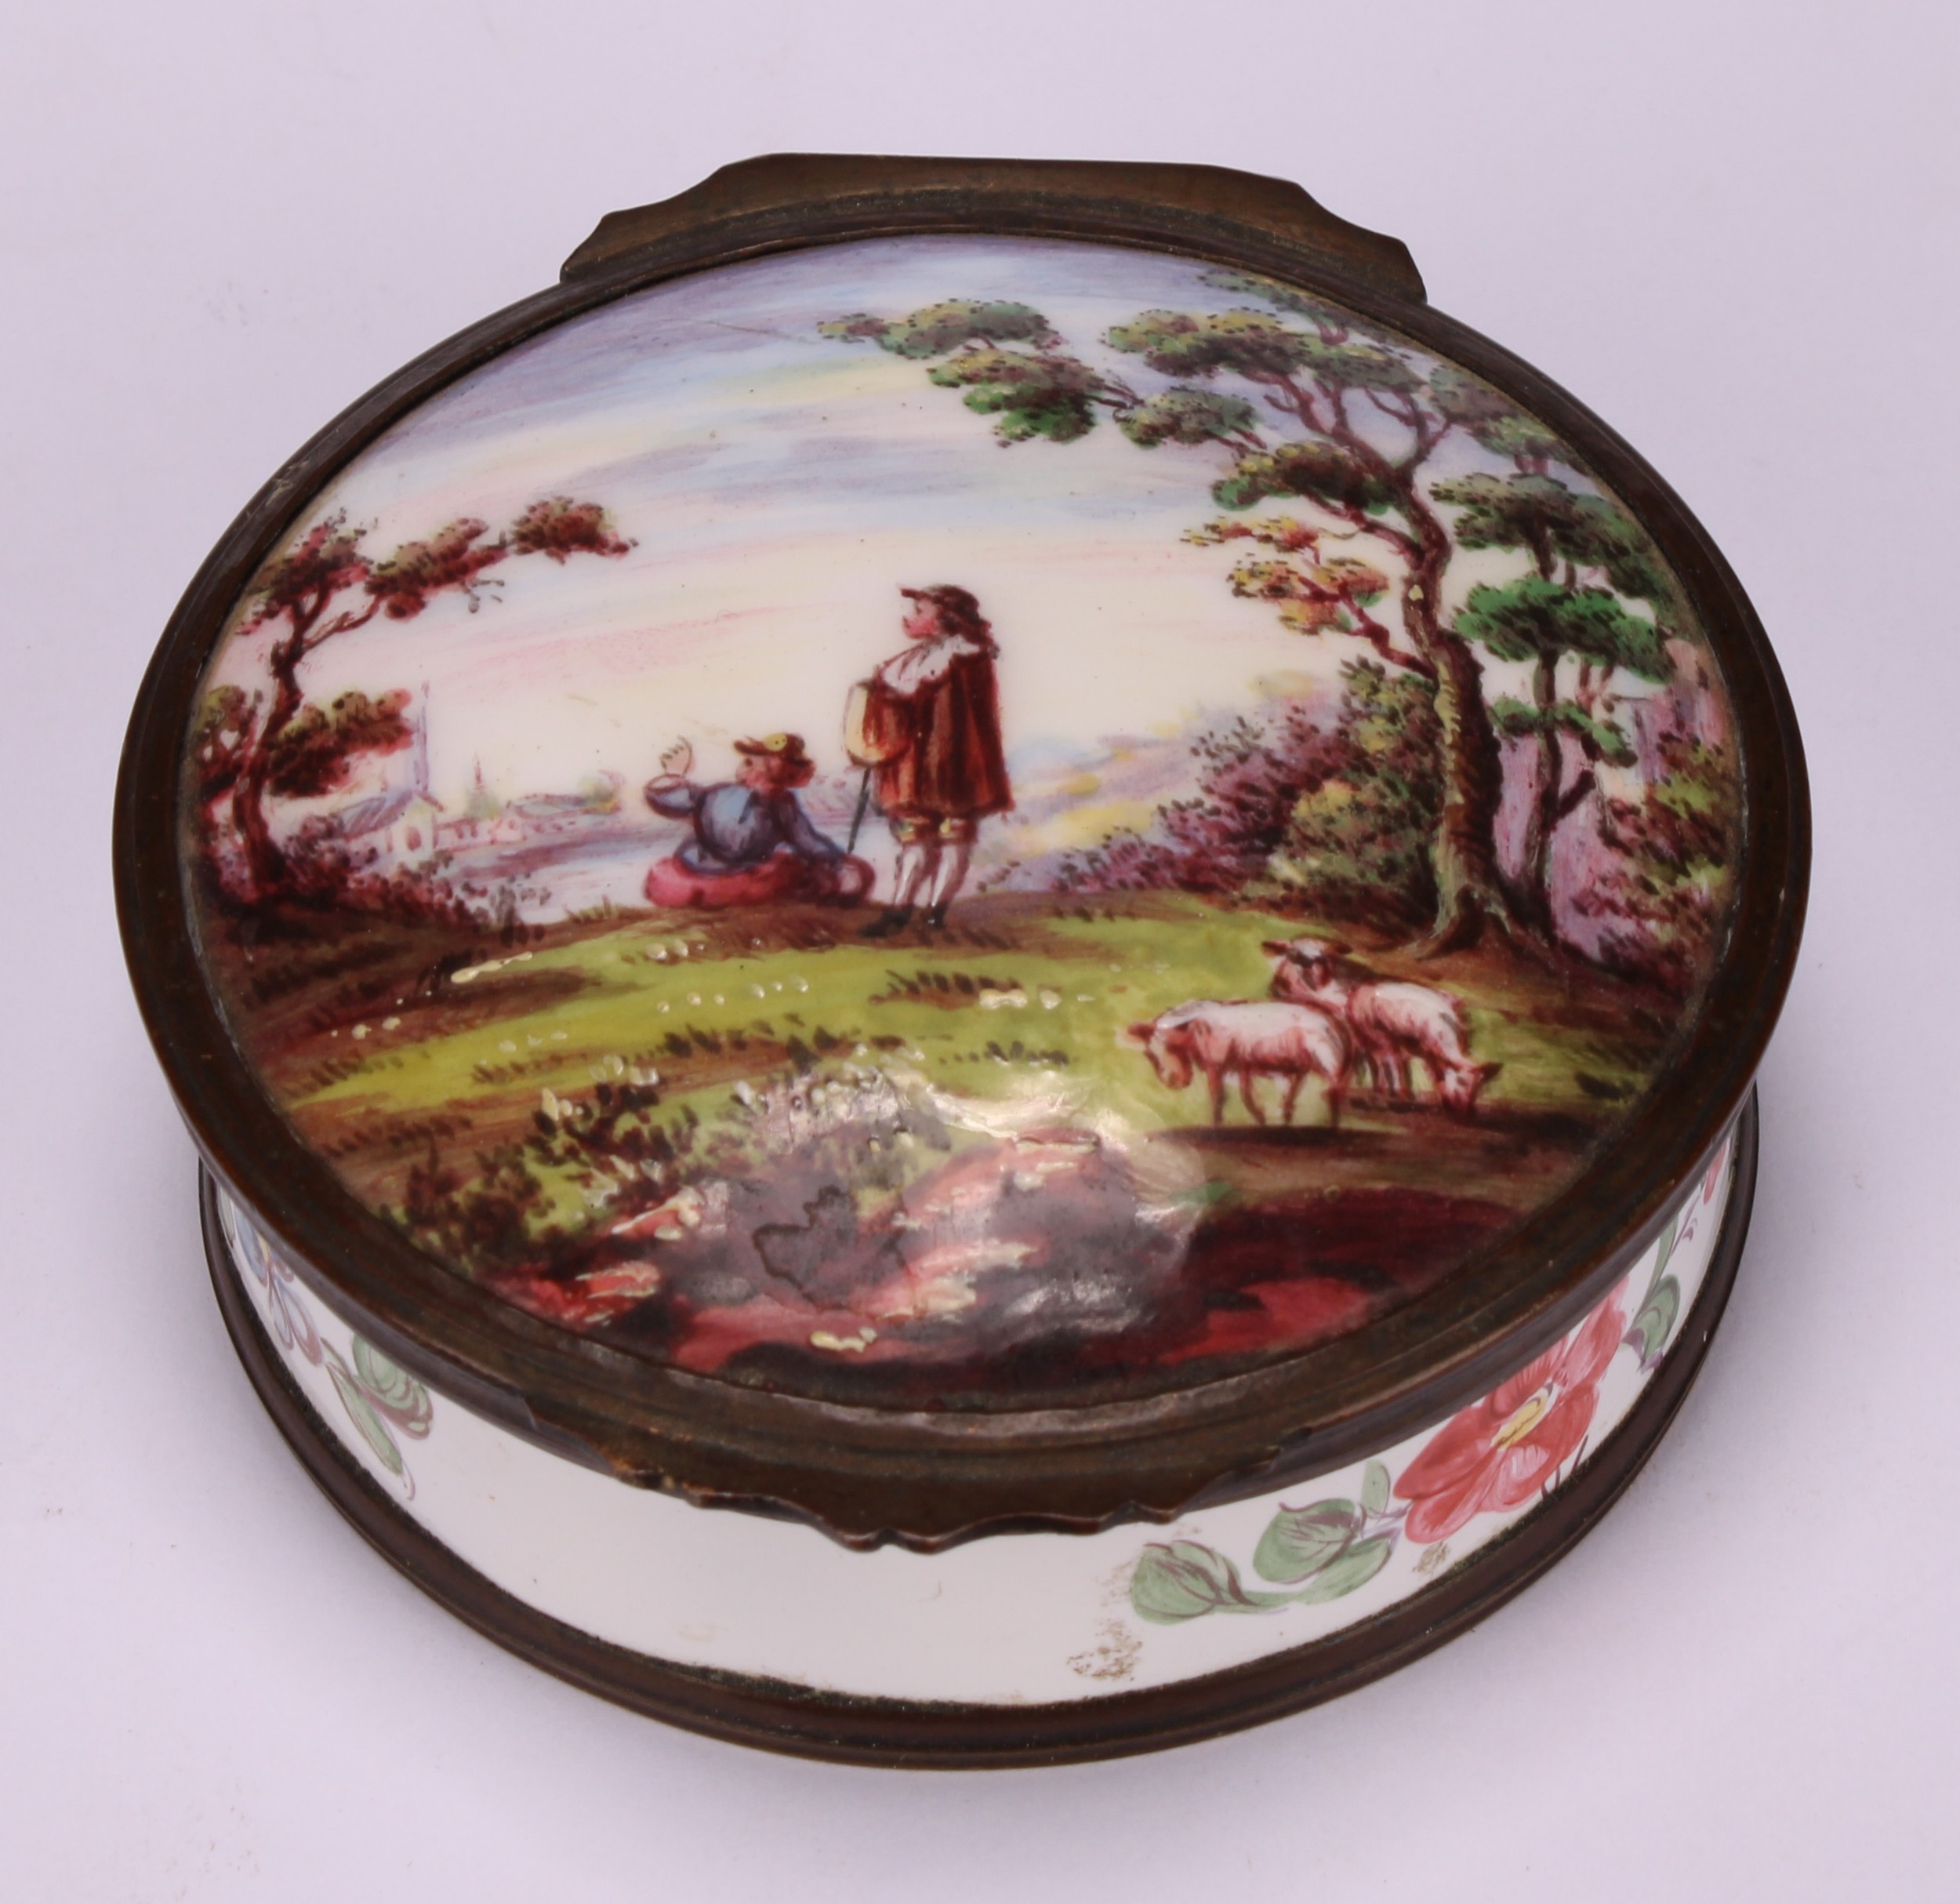 A 19th century enamel circular table snuff box, hinged cover painted with young shepherds in a - Image 2 of 5